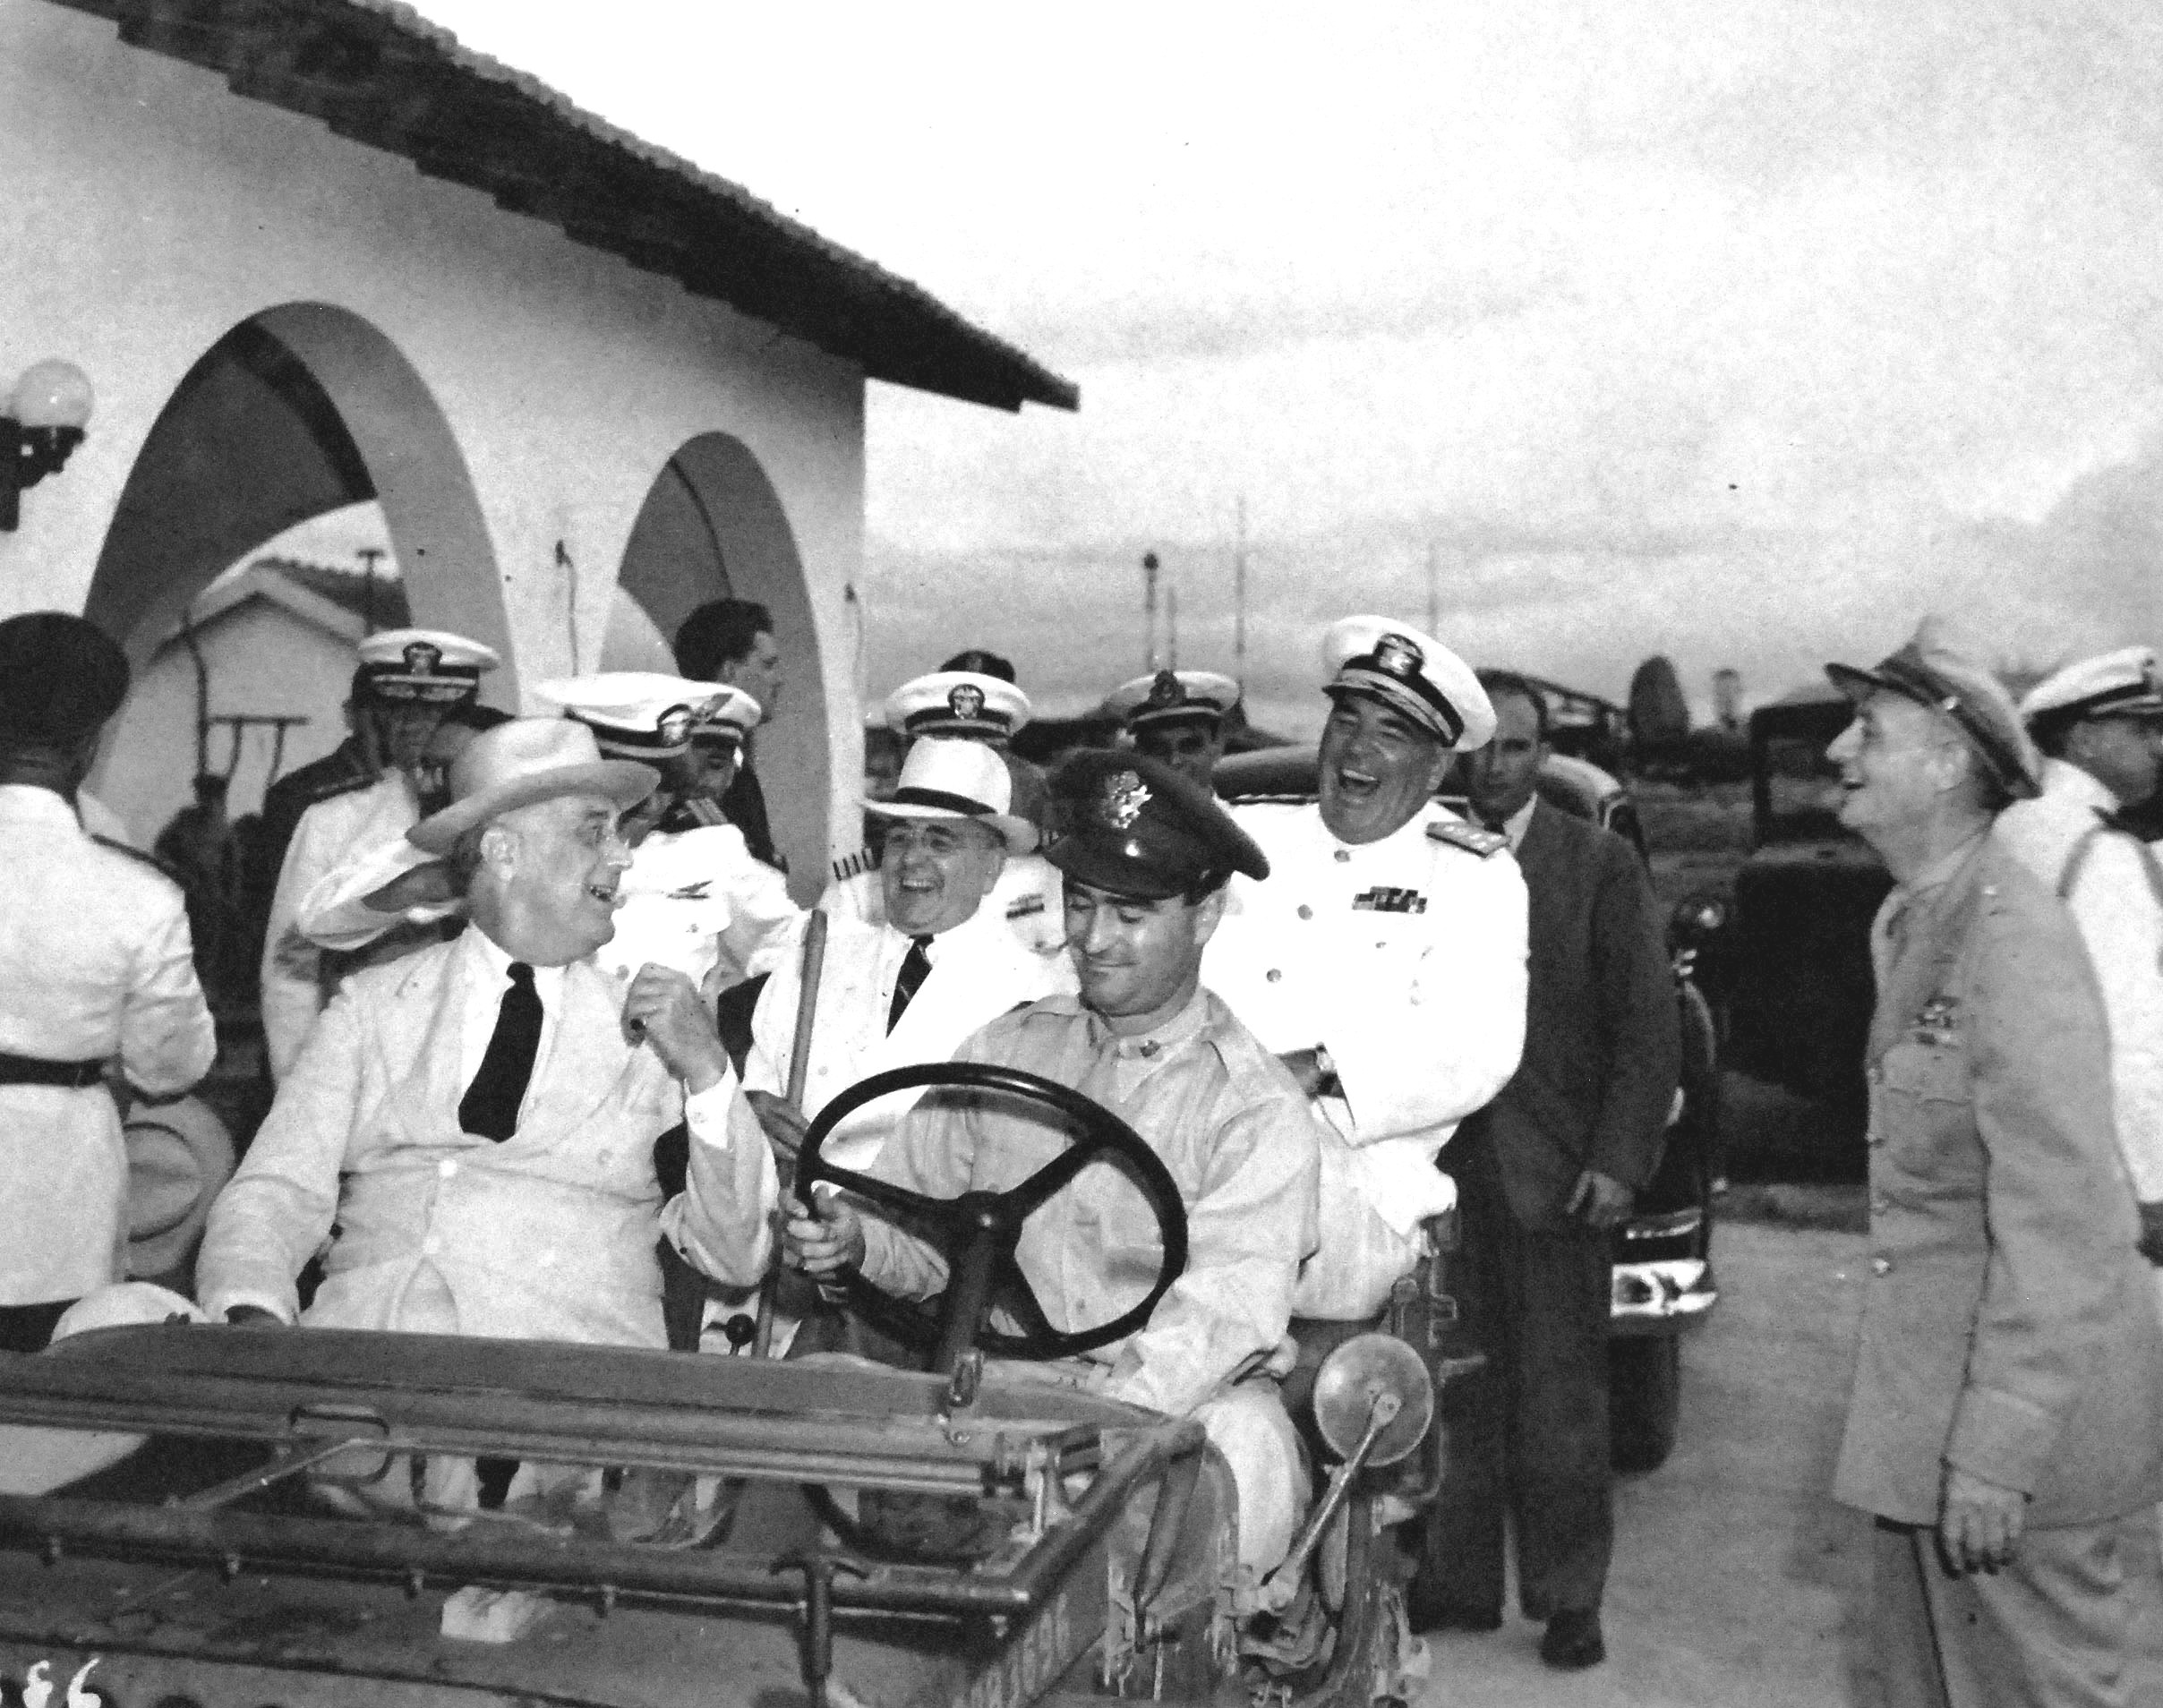 Photo] Franklin Roosevelt inspecting facilities in Natal, Brazil as he  travels back to the United States after the Casablanca Conference, 28 Jan  1943. Brazilian president Getulio Vargas is seated in the back